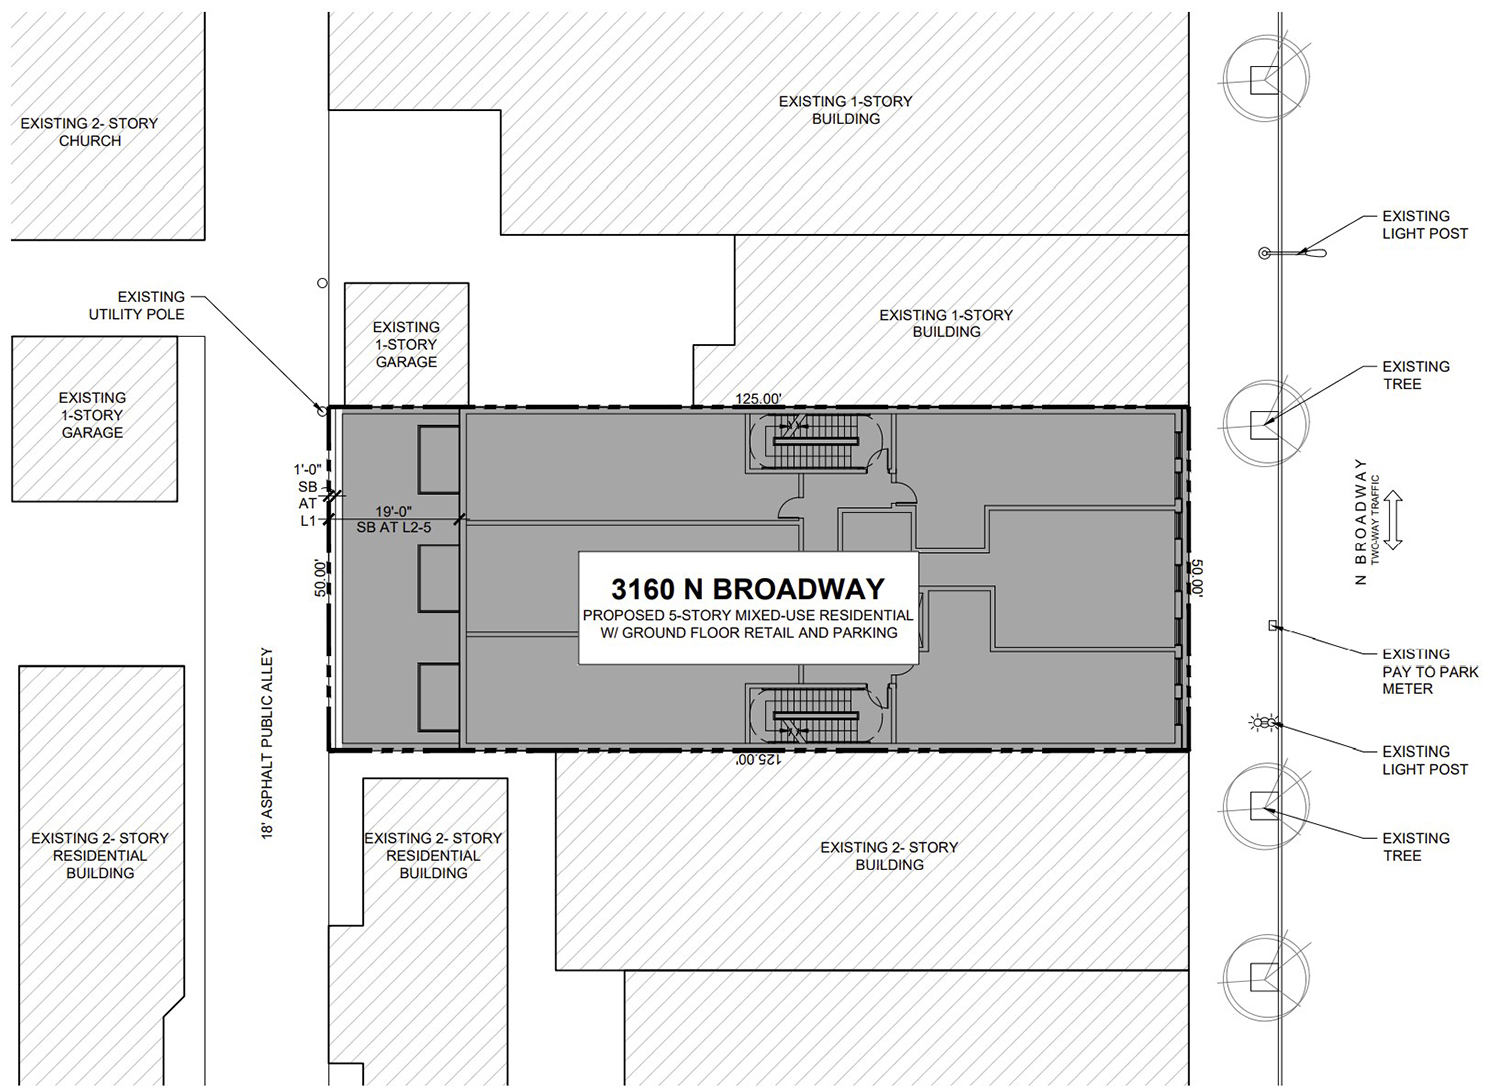 Site Plan of 3160 N Broadway. Drawing by Sullivan Goulette Wilson Architects